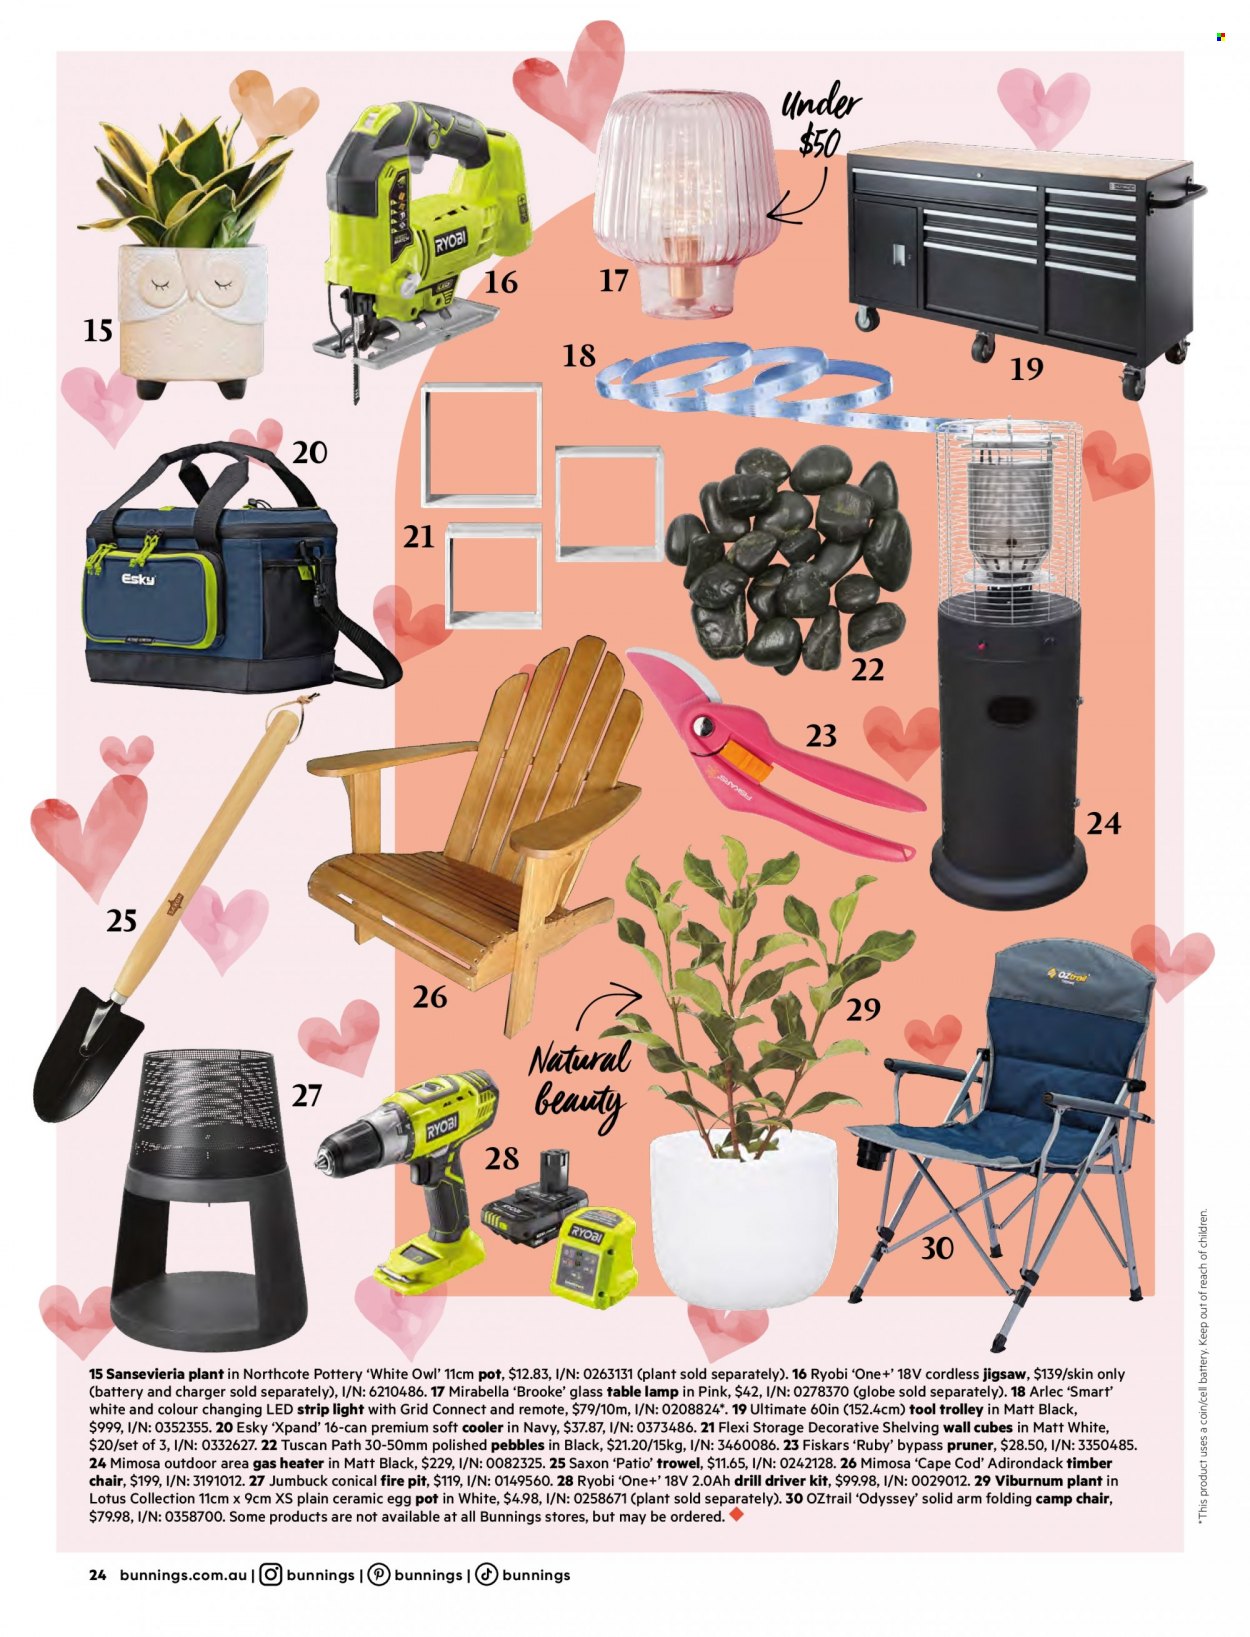 thumbnail - Bunnings Warehouse mailer - 01.04.2023 - 30.04.2023 - Sales products - trolley, chair, Lotus, ceramic egg, Fiskars, pot, lamp, LED strip, table lamp, heater, gas heater, drill, drill driver kit, Ryobi, fire bowl. Page 24.